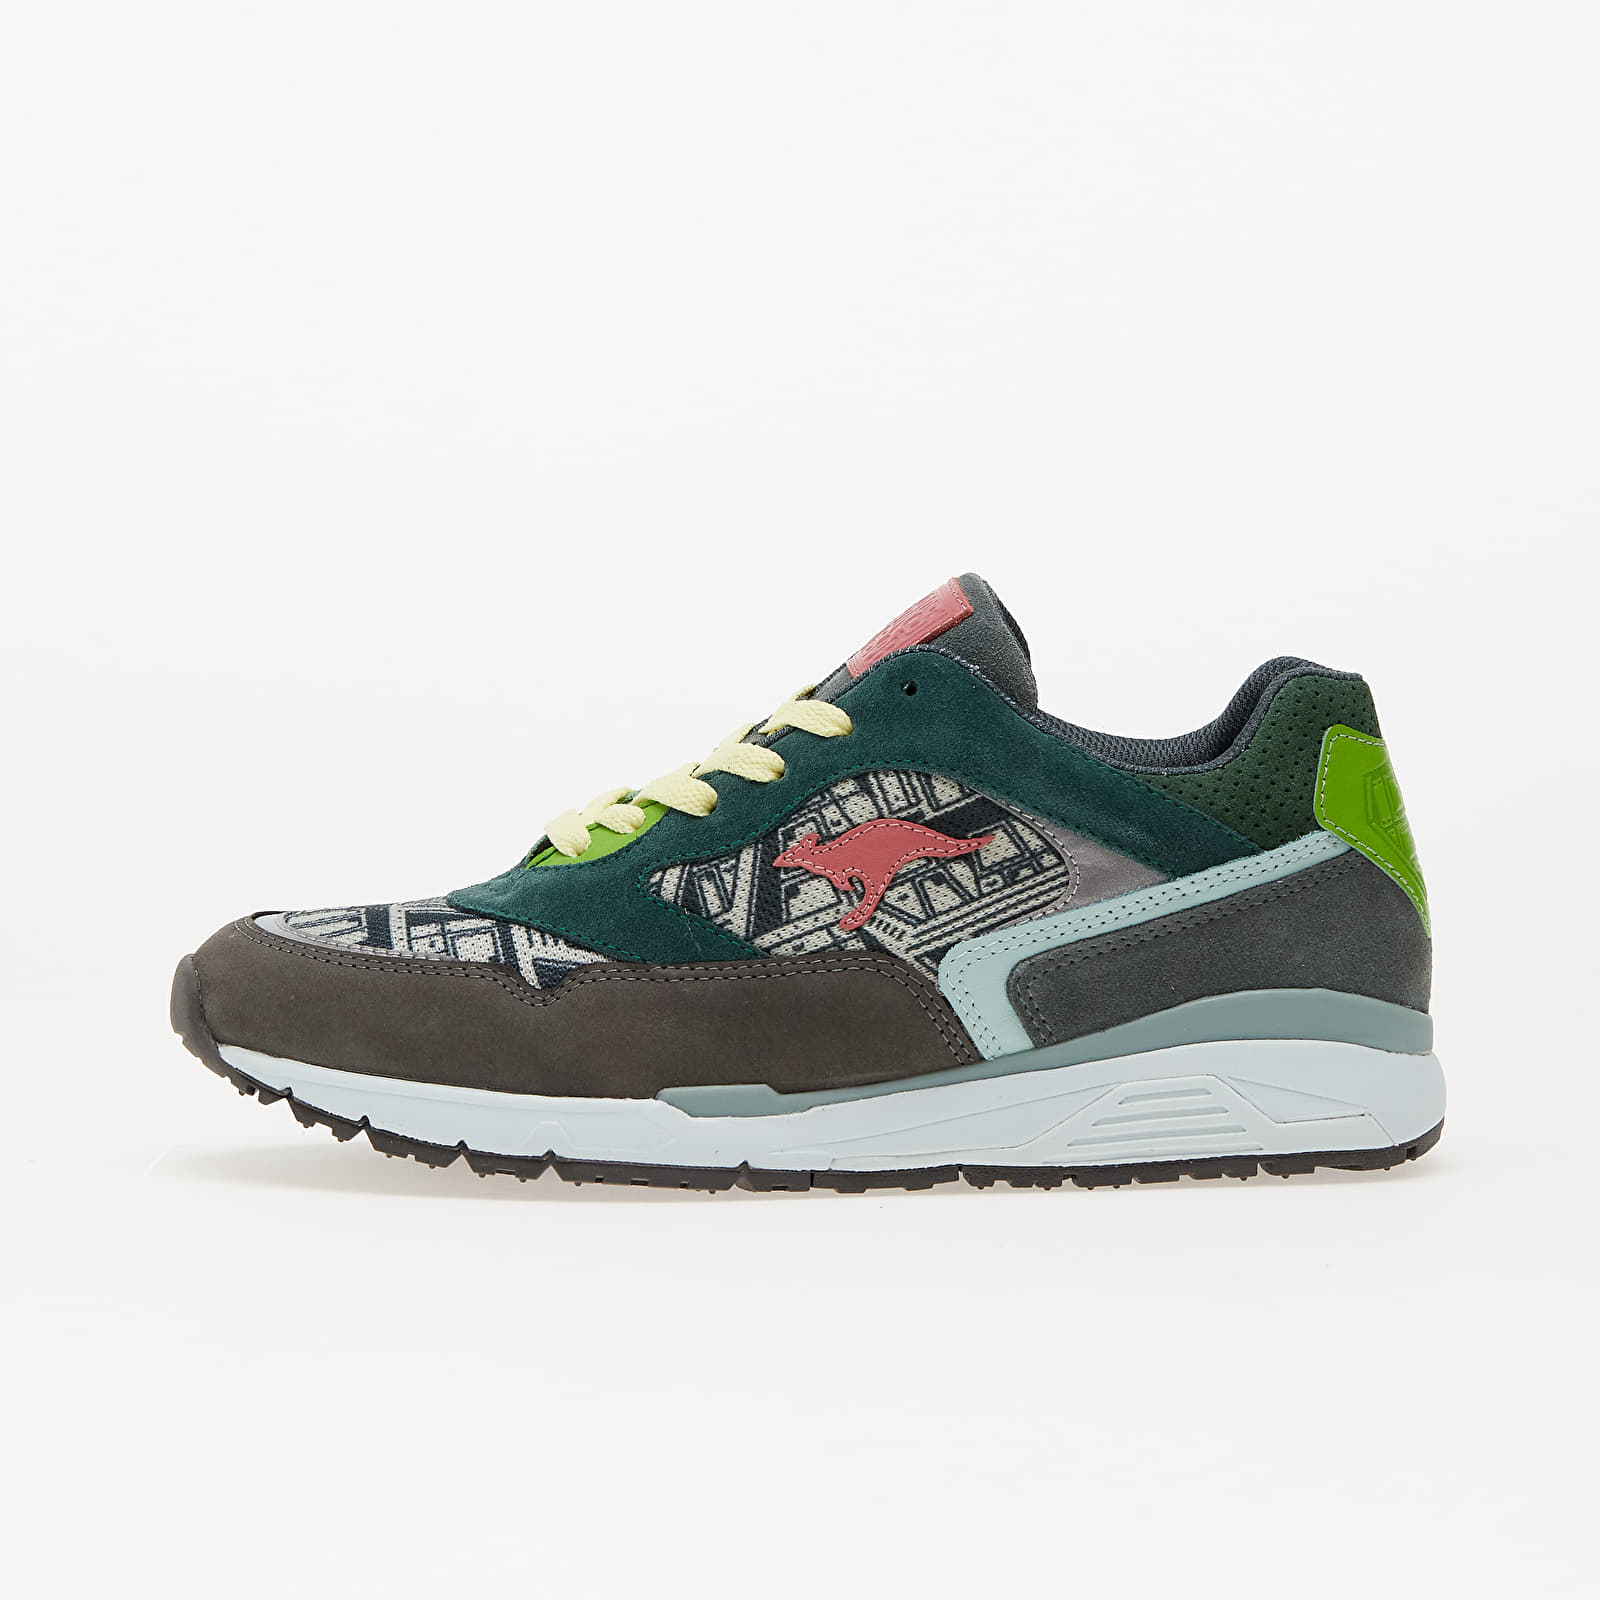 Chaussures et baskets homme KangaROOS x Ghica Popa "Spaceship" Multicolor